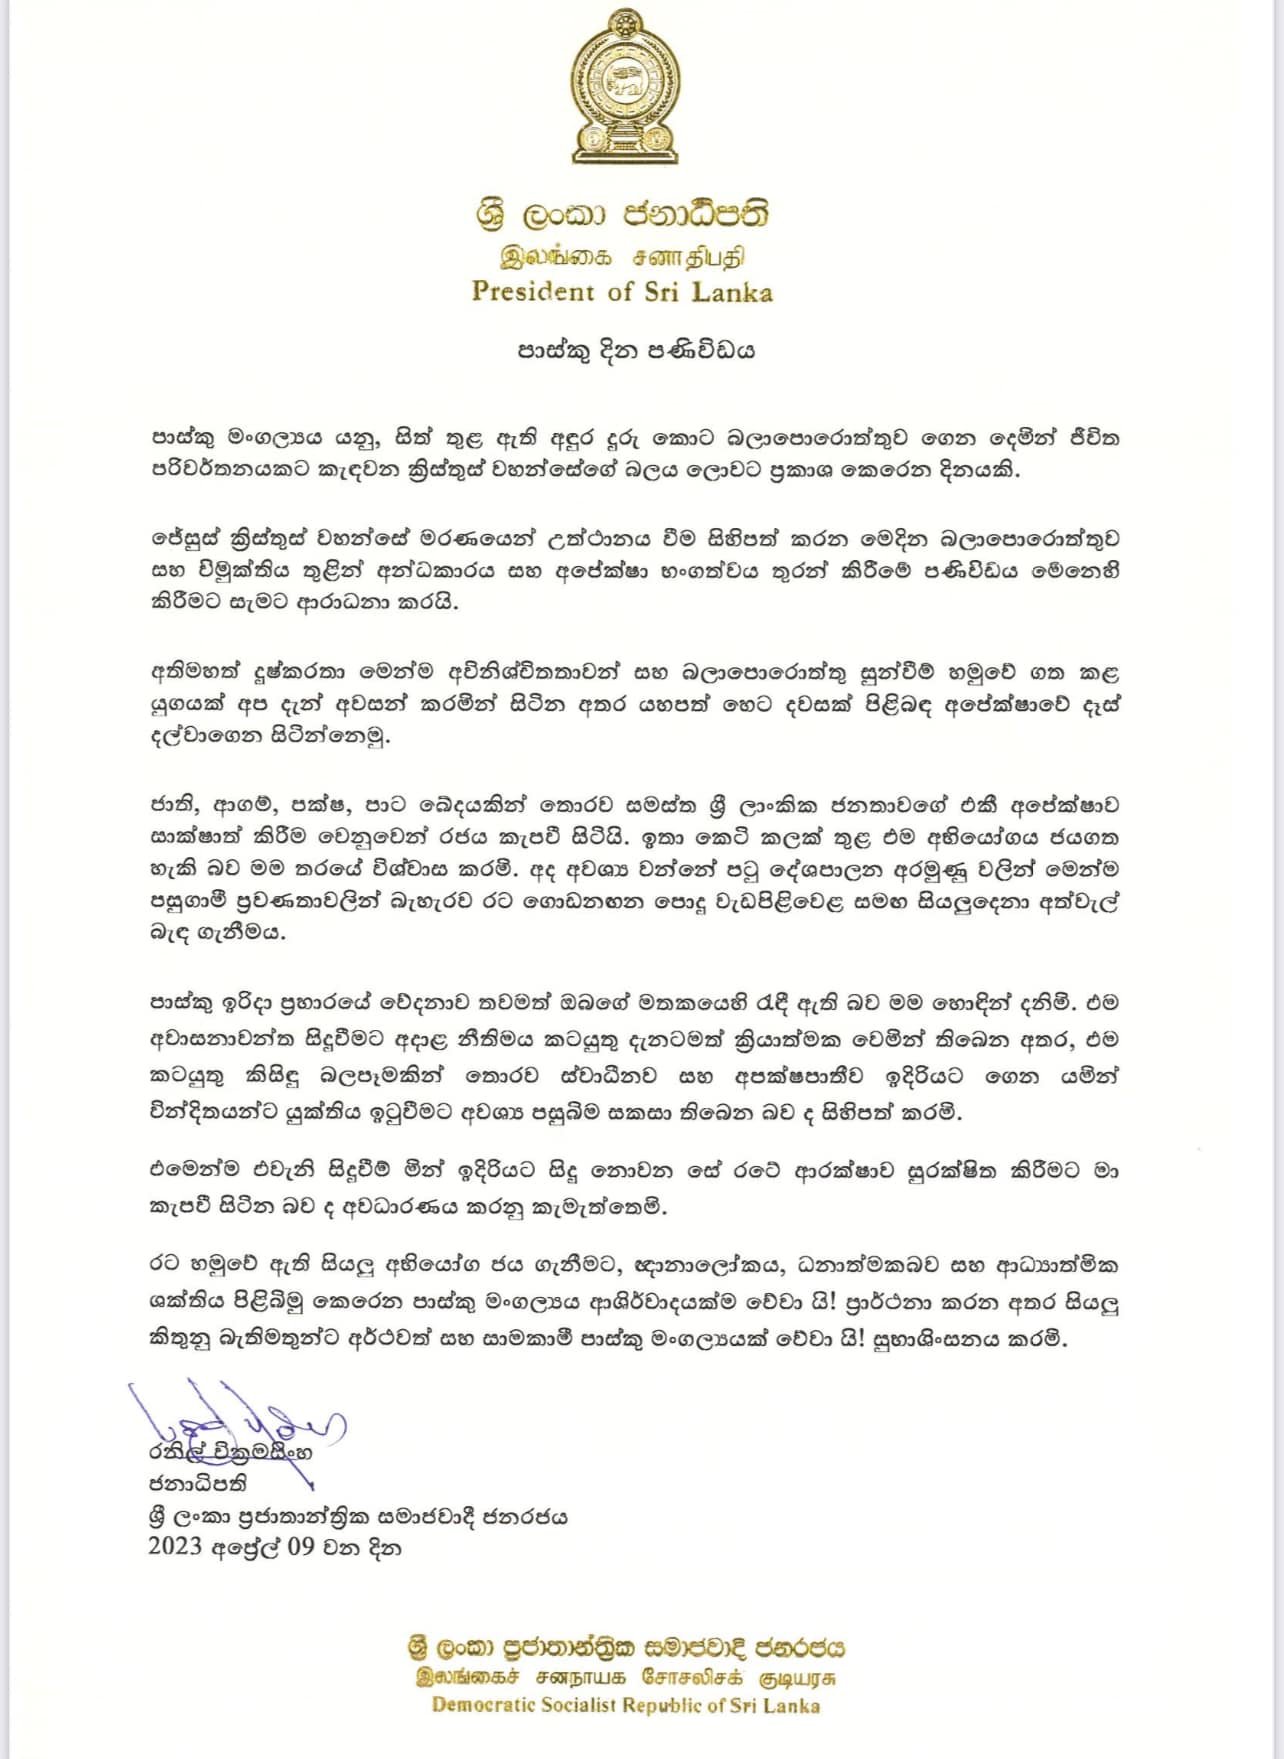 Easter Message by His Excellently the President of Sri Lanka.